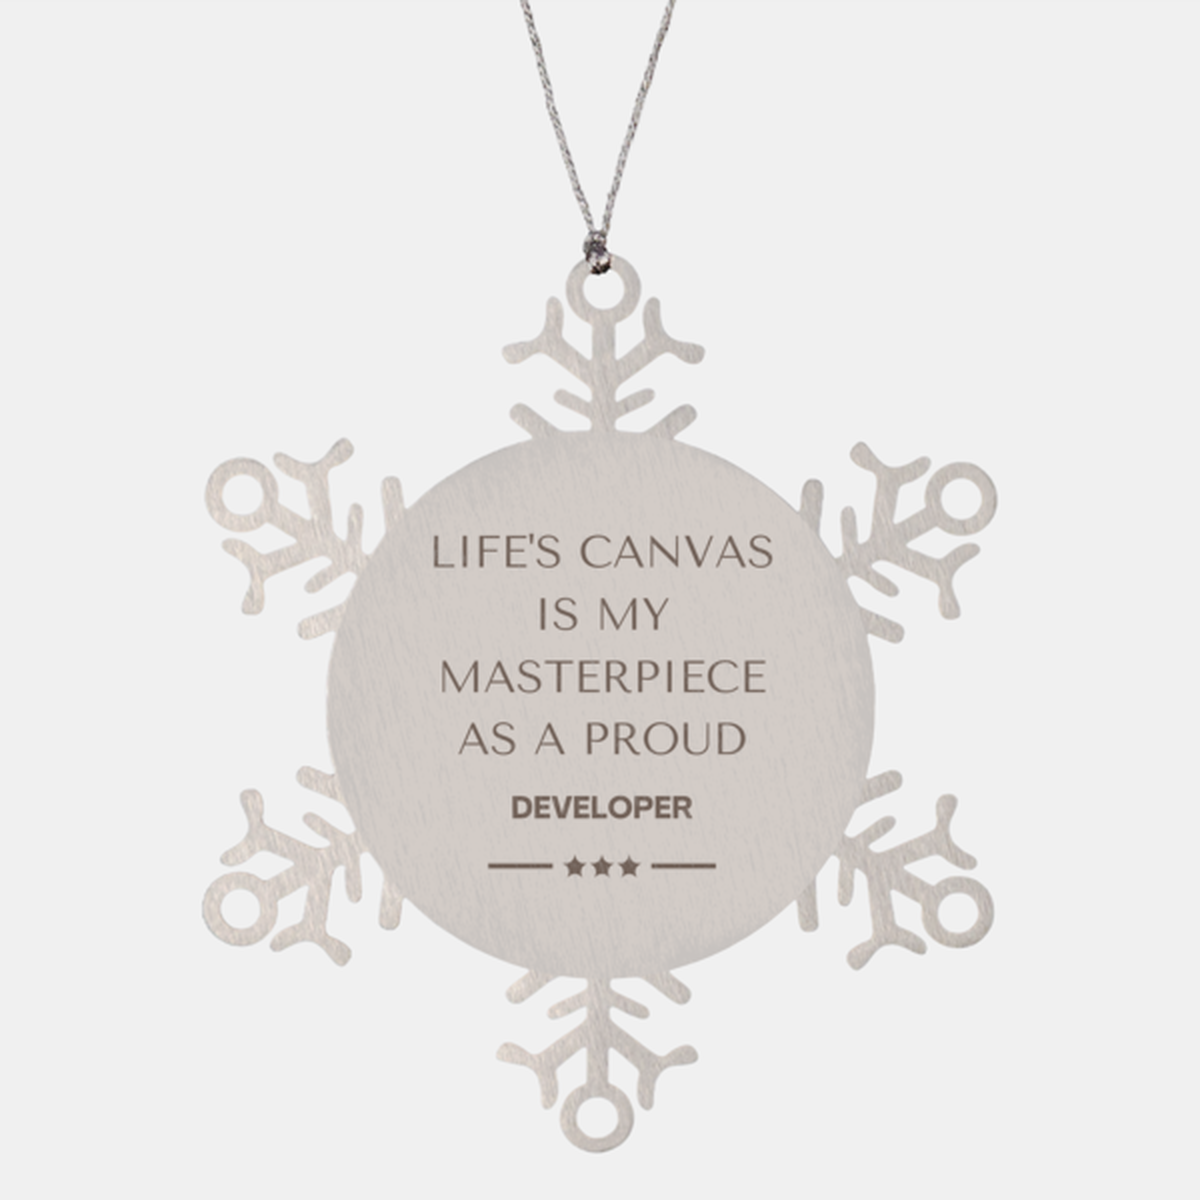 Proud Developer Gifts, Life's canvas is my masterpiece, Epic Birthday Christmas Unique Snowflake Ornament For Developer, Coworkers, Men, Women, Friends